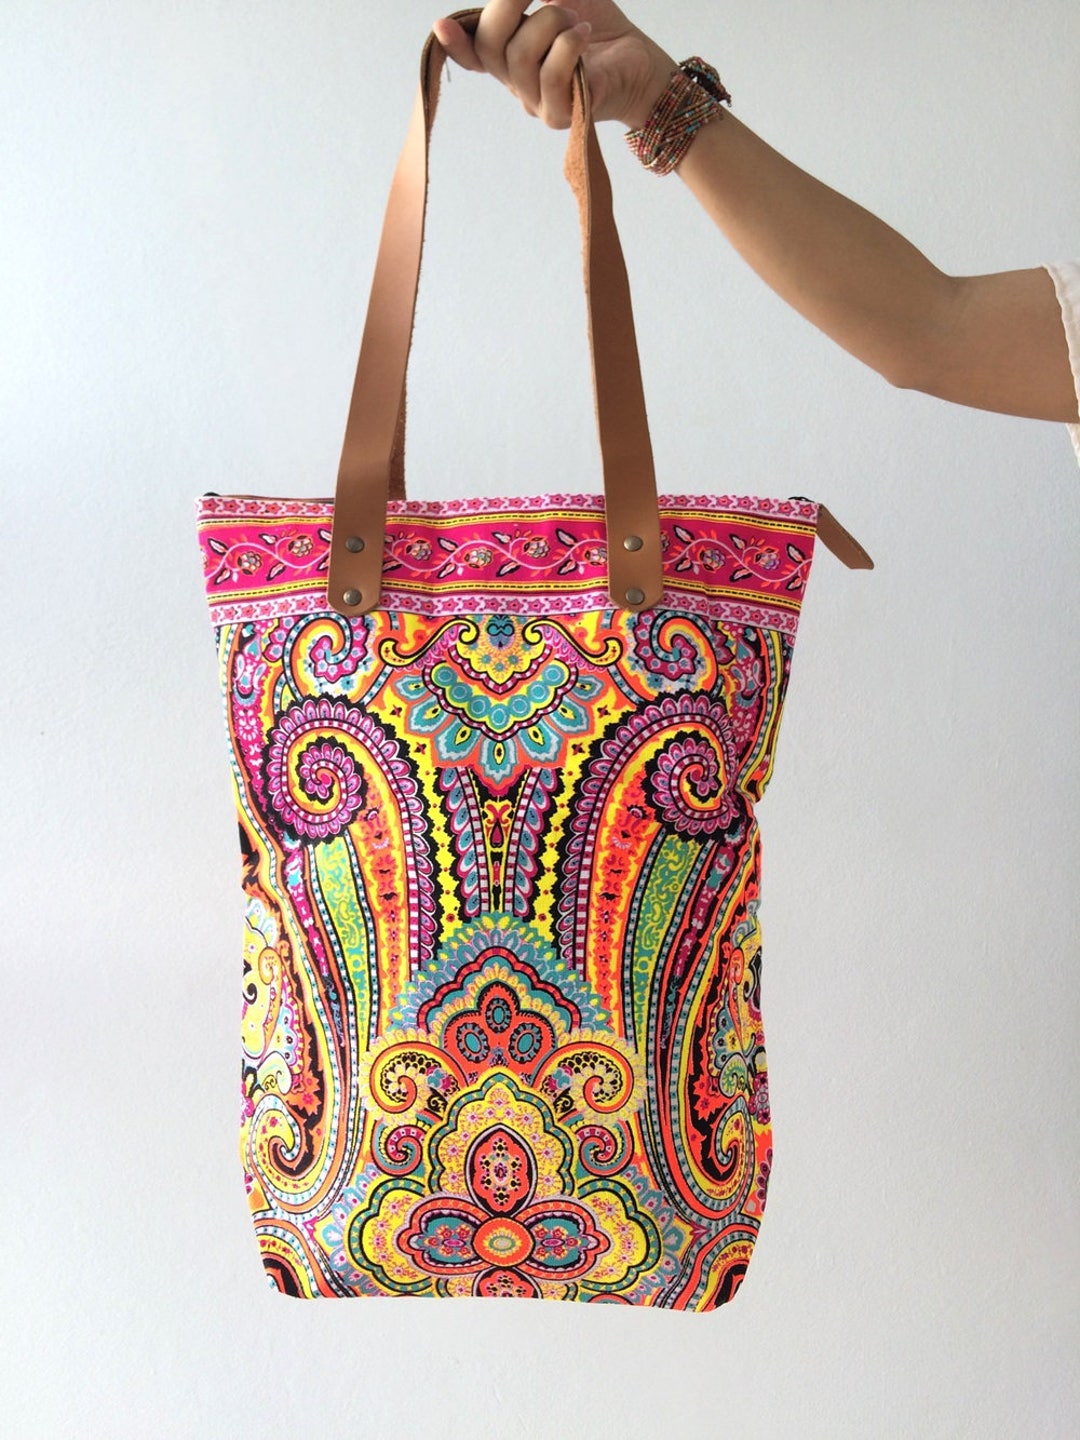 Coachella Canvas Tote Bag Gift for Her Totes Bohemian Bag - Etsy